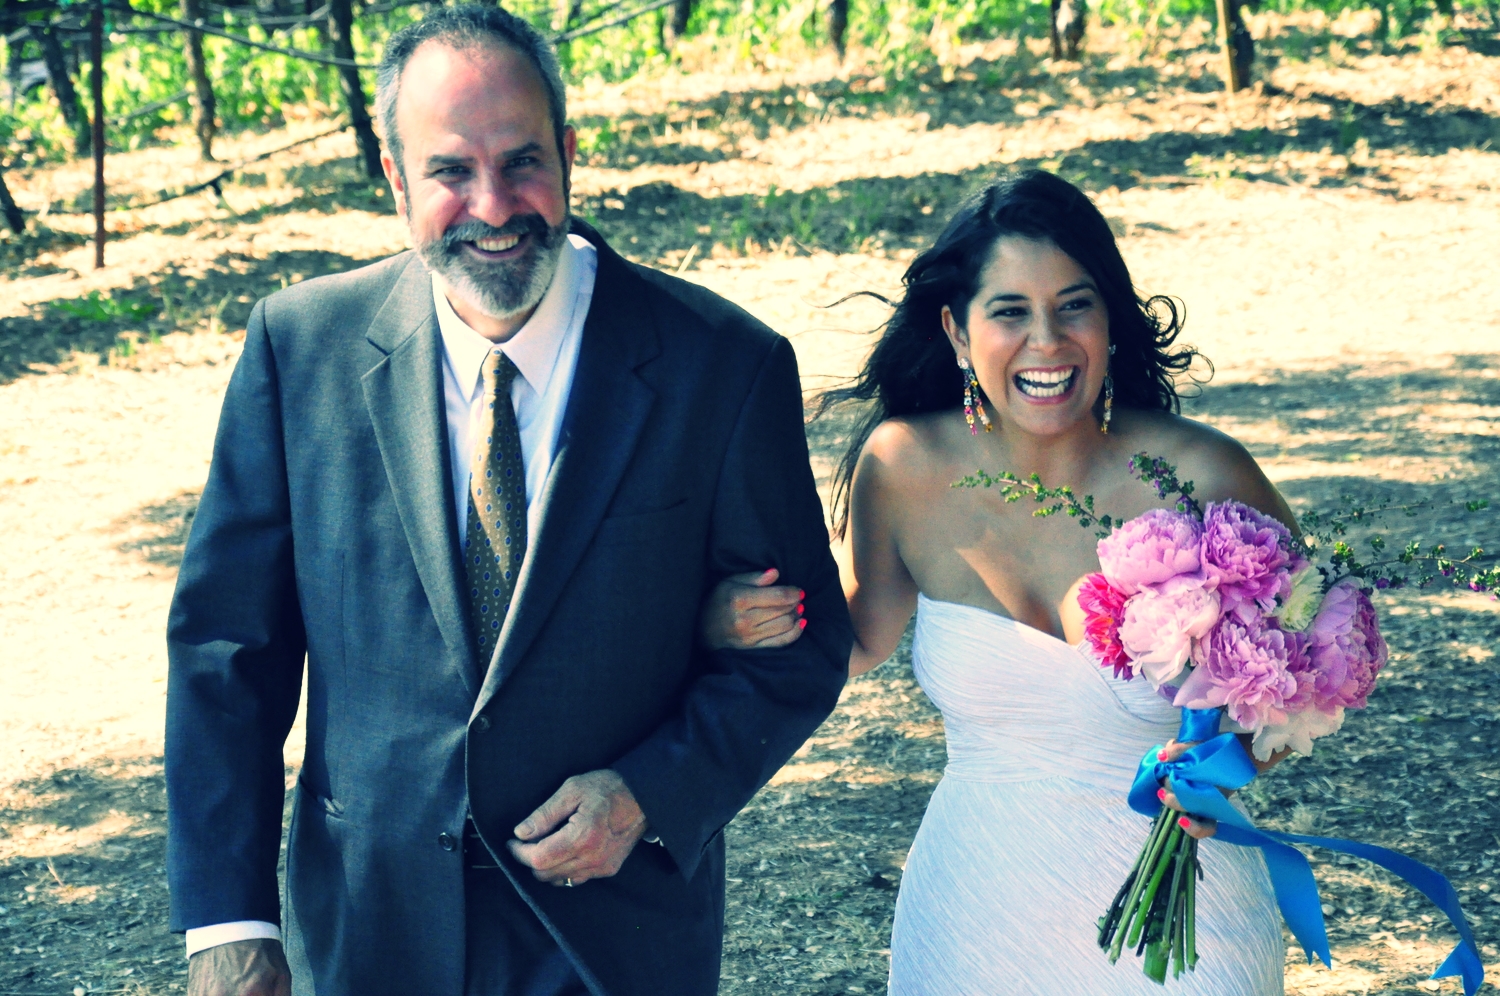 My dad walking me down the aisle.